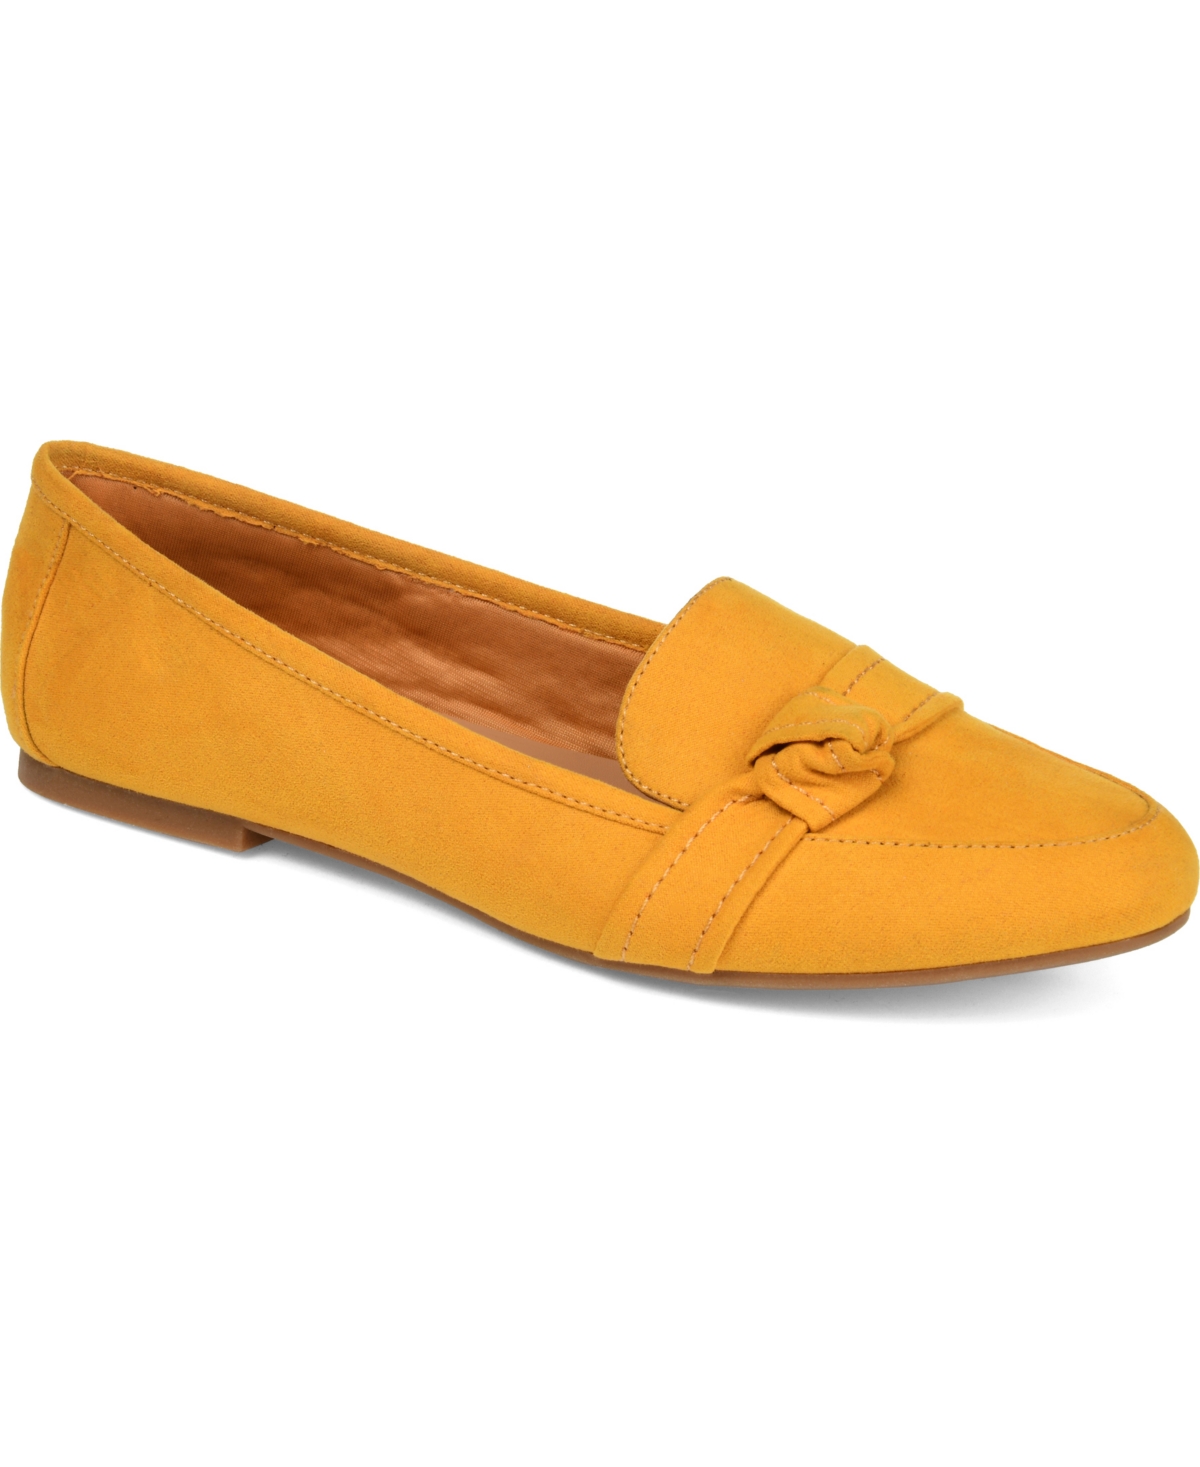 Journee Collection Women's Marci Loafer Women's Shoes